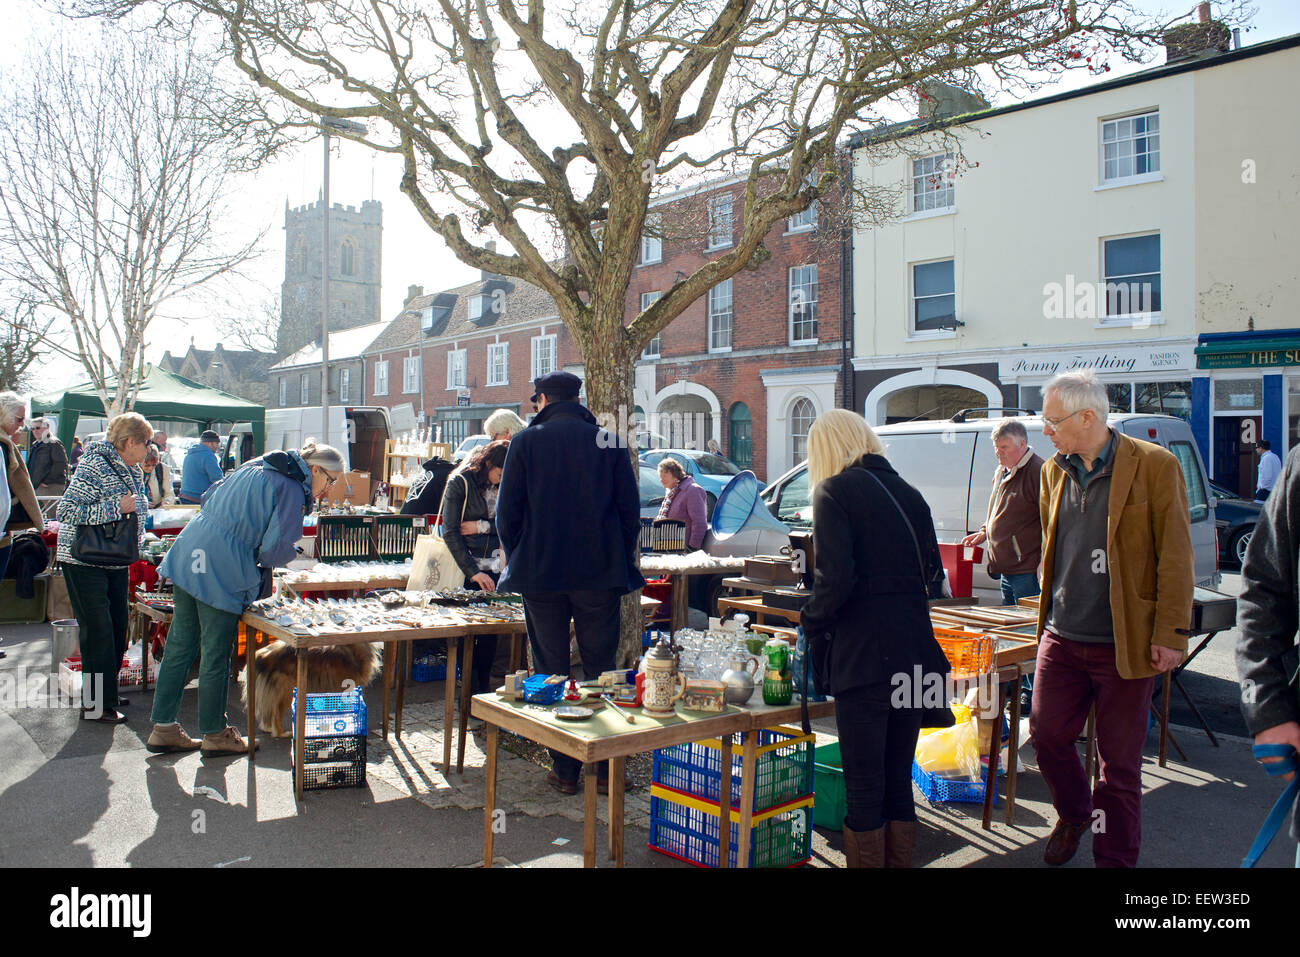 Bridport street antique market, held on a Saturday in the Country market Town of Bridport, Dorset Stock Photo